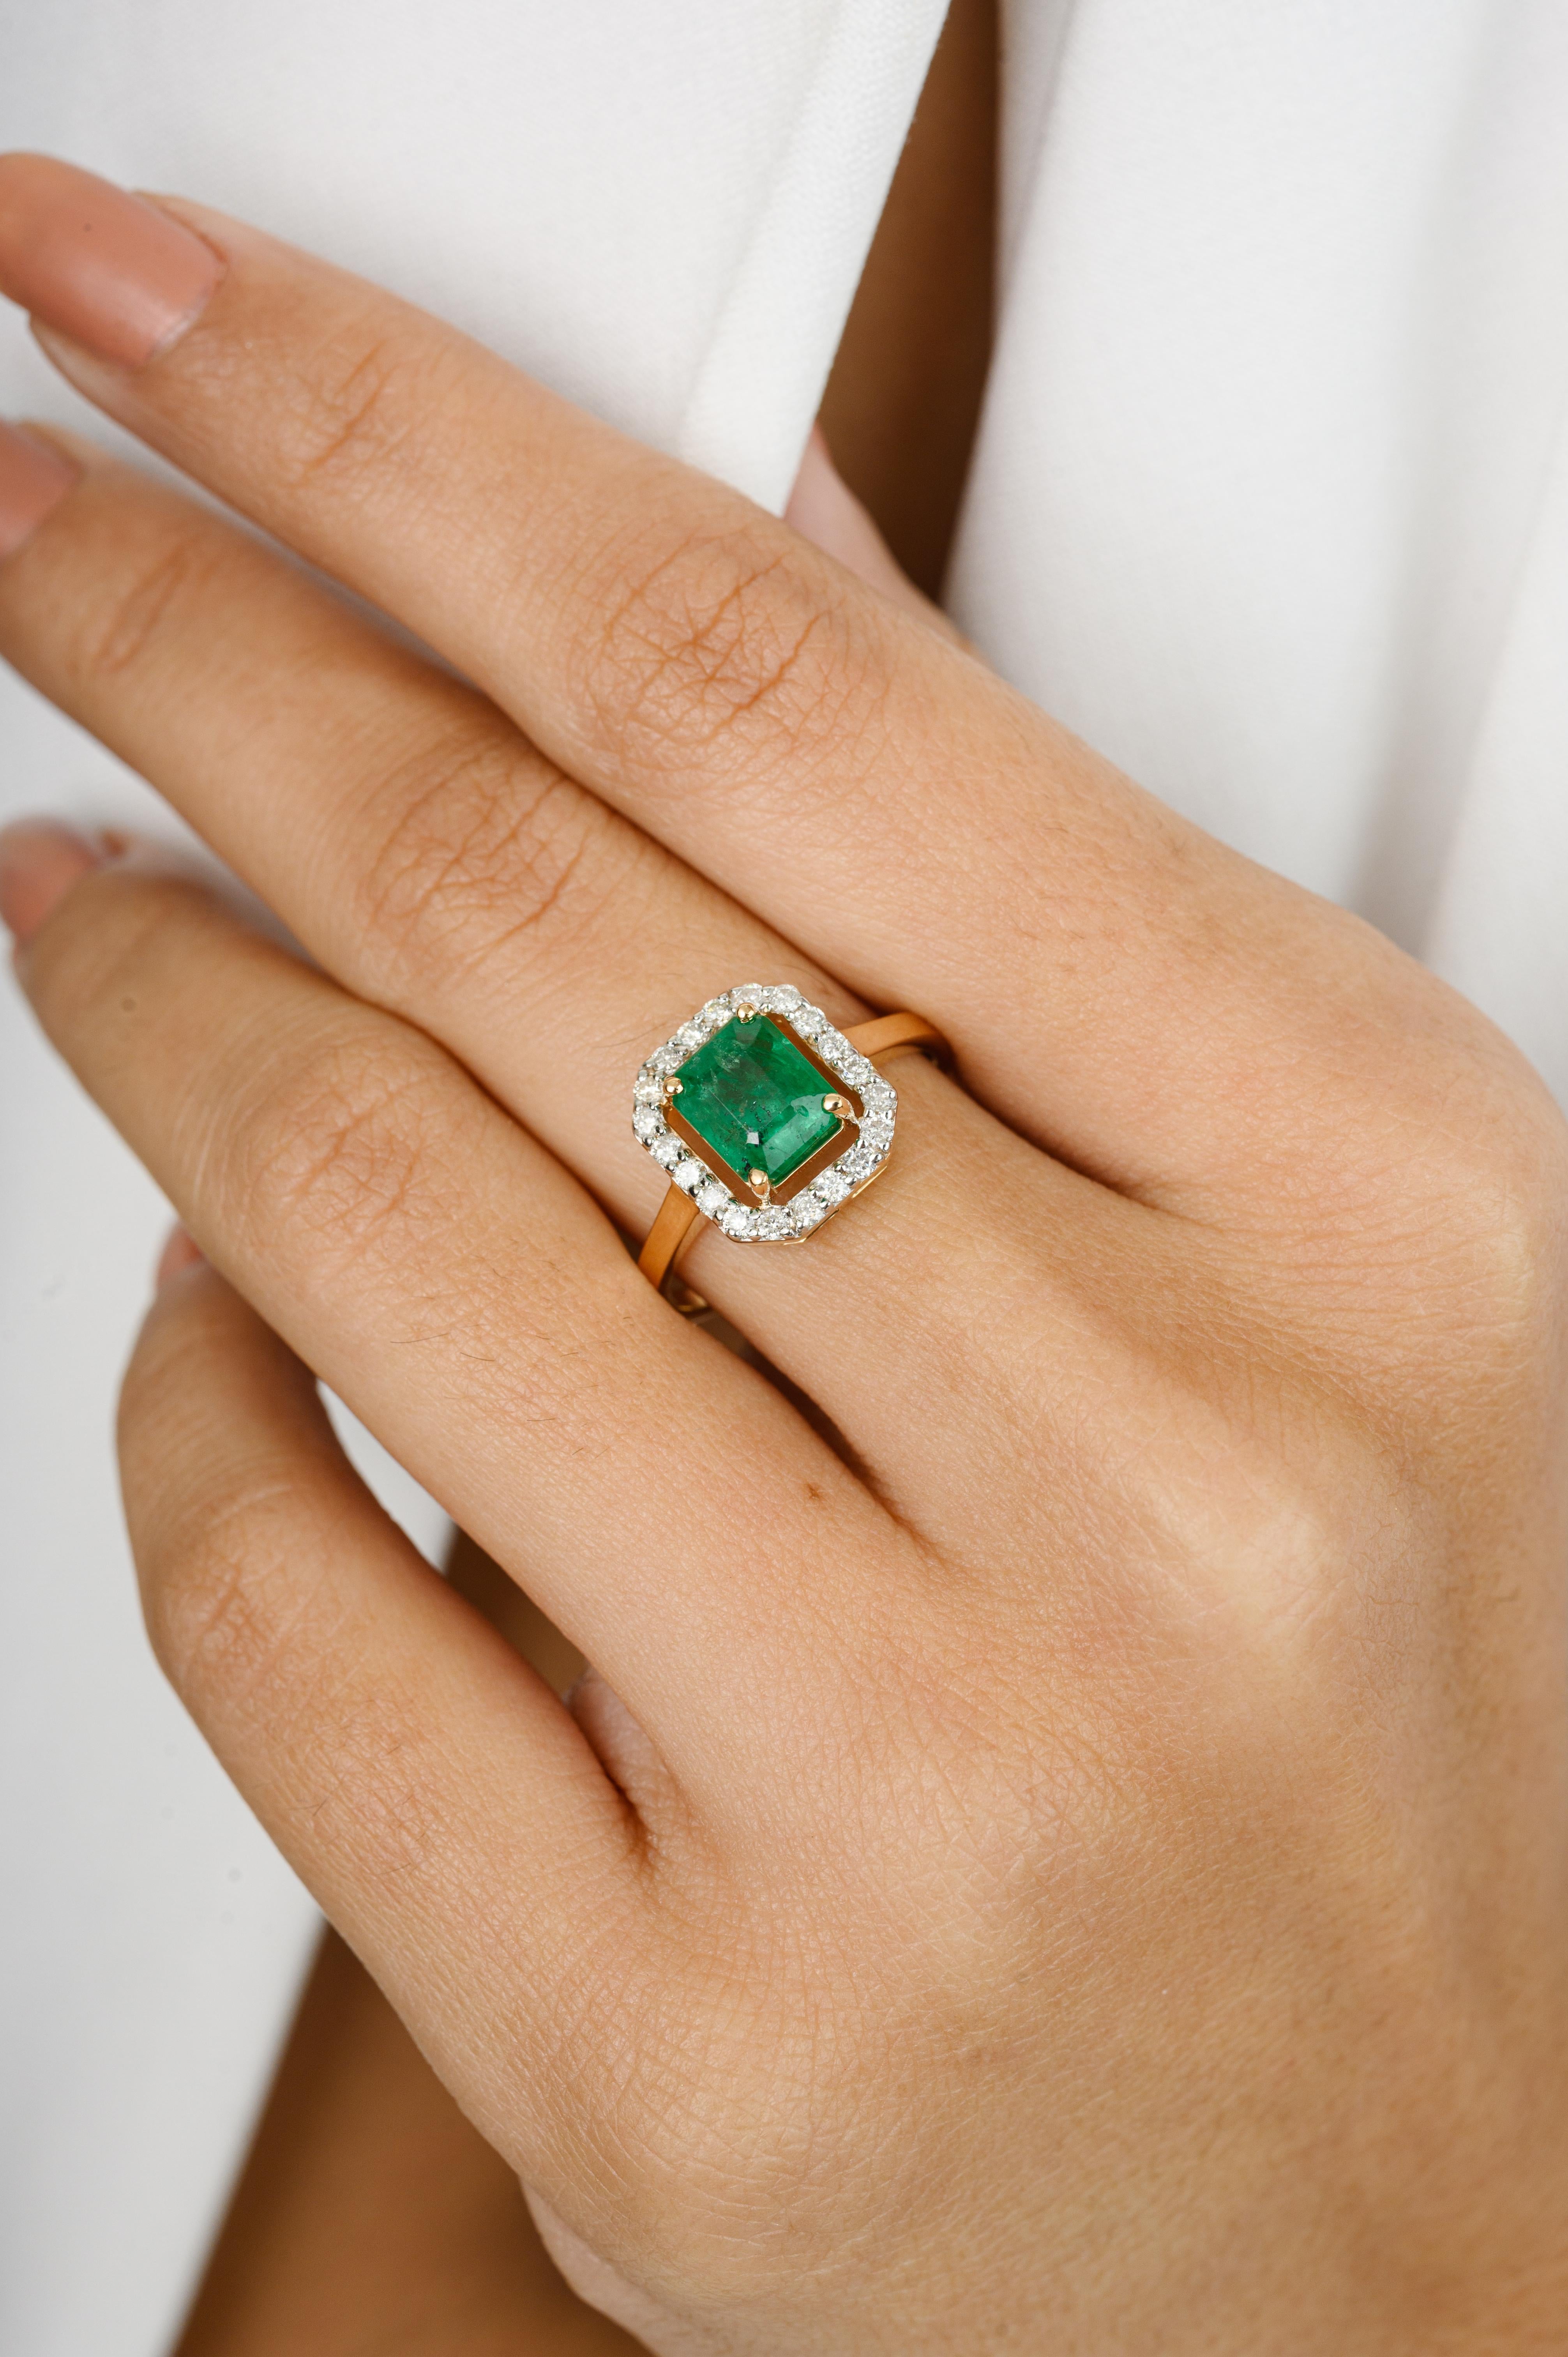 For Sale:  1.5 Carat Octagon Emerald Halo Diamond Engagement Ring in 18k Yellow Gold 7